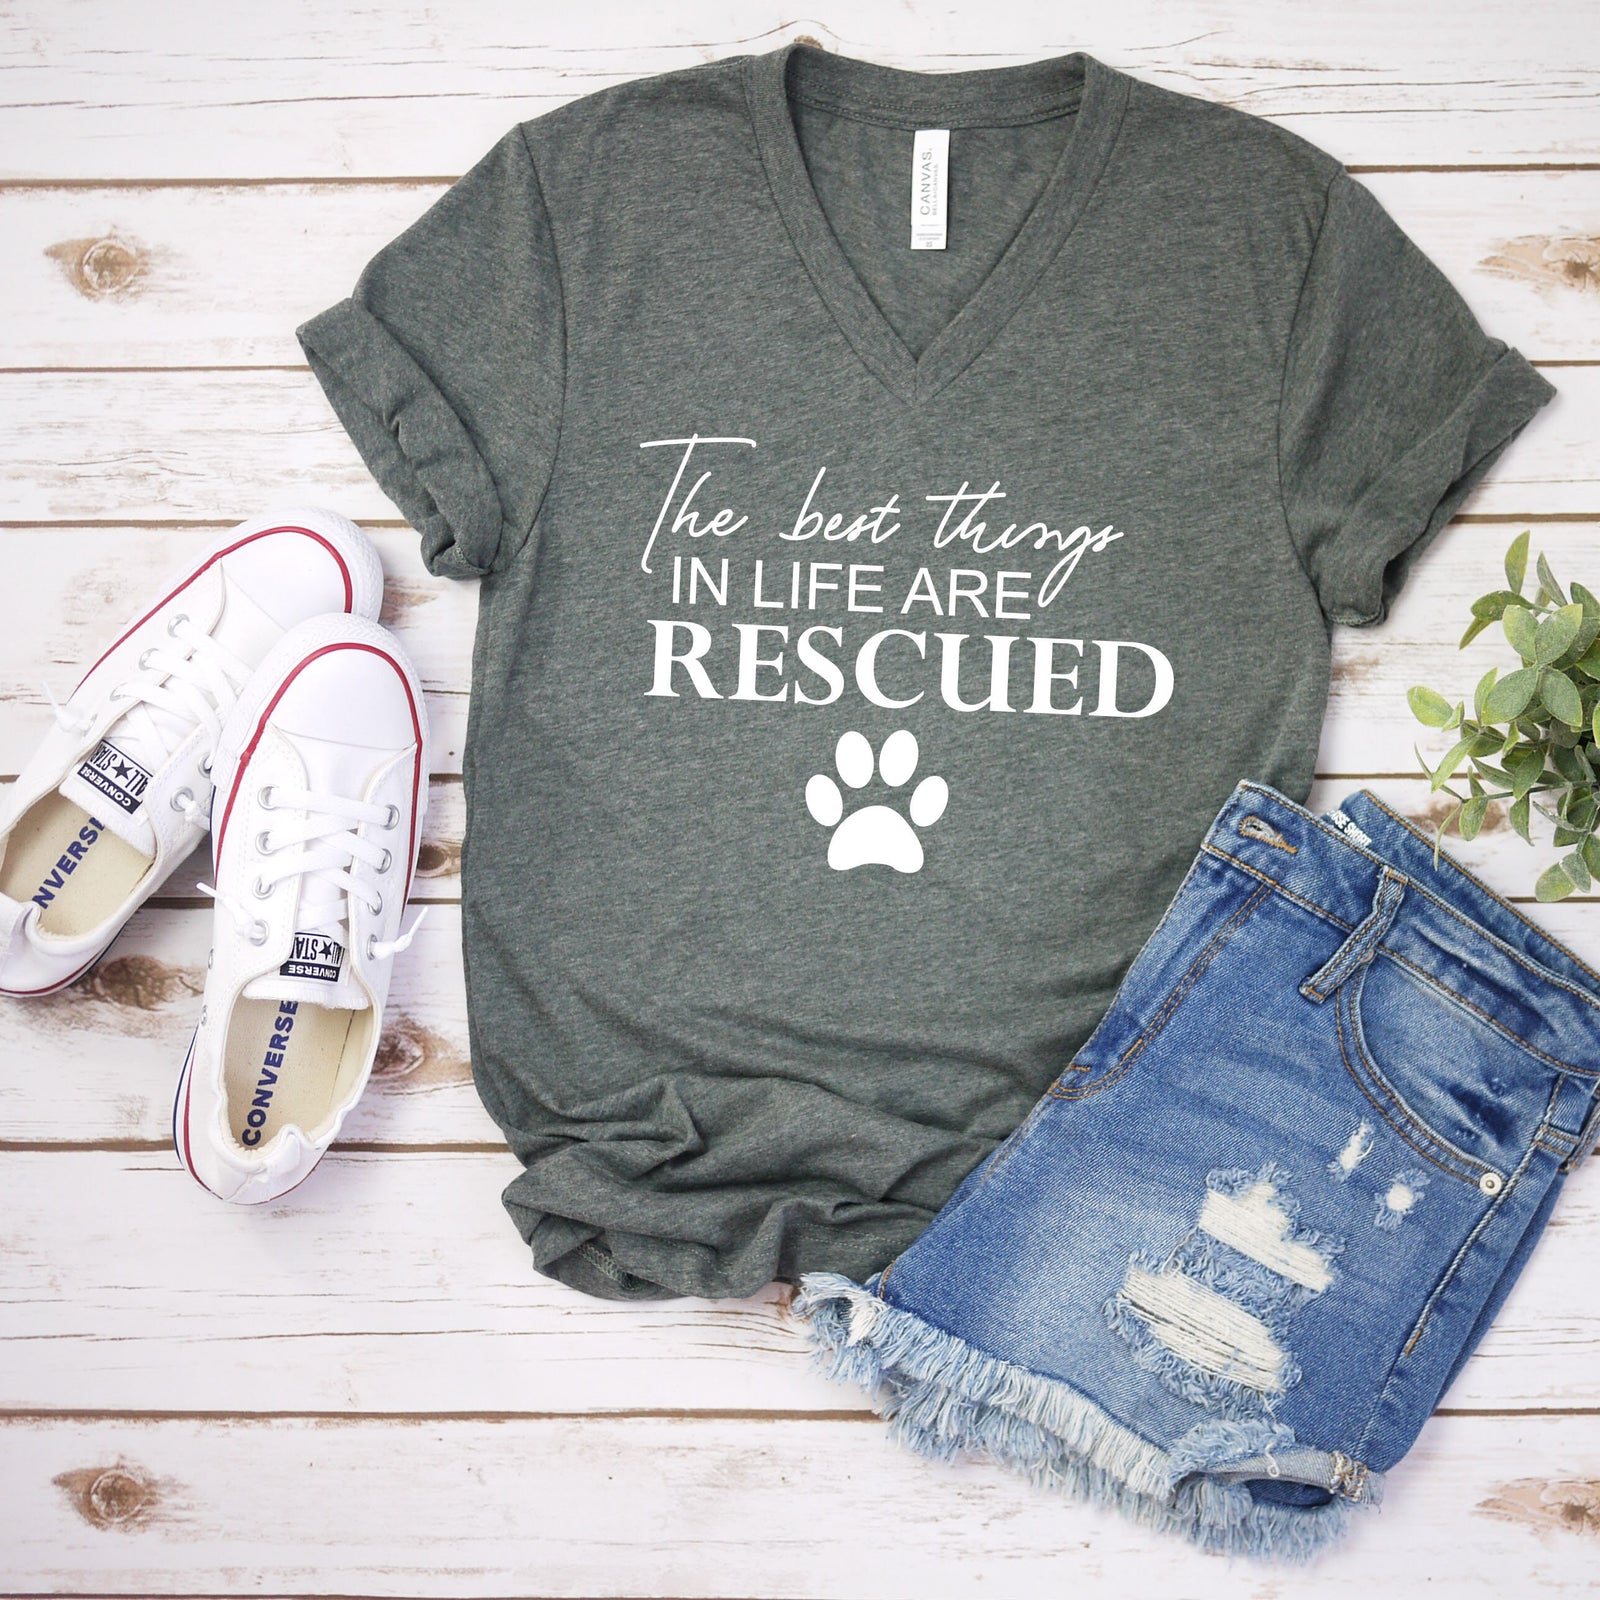 The Best Things in Life are Rescued T Shirt - Dog Mom Statement Shirt - Pet Rescue - Dog Rescue Shirt - Dog Lover T Shirt - Dog Paw Shirt